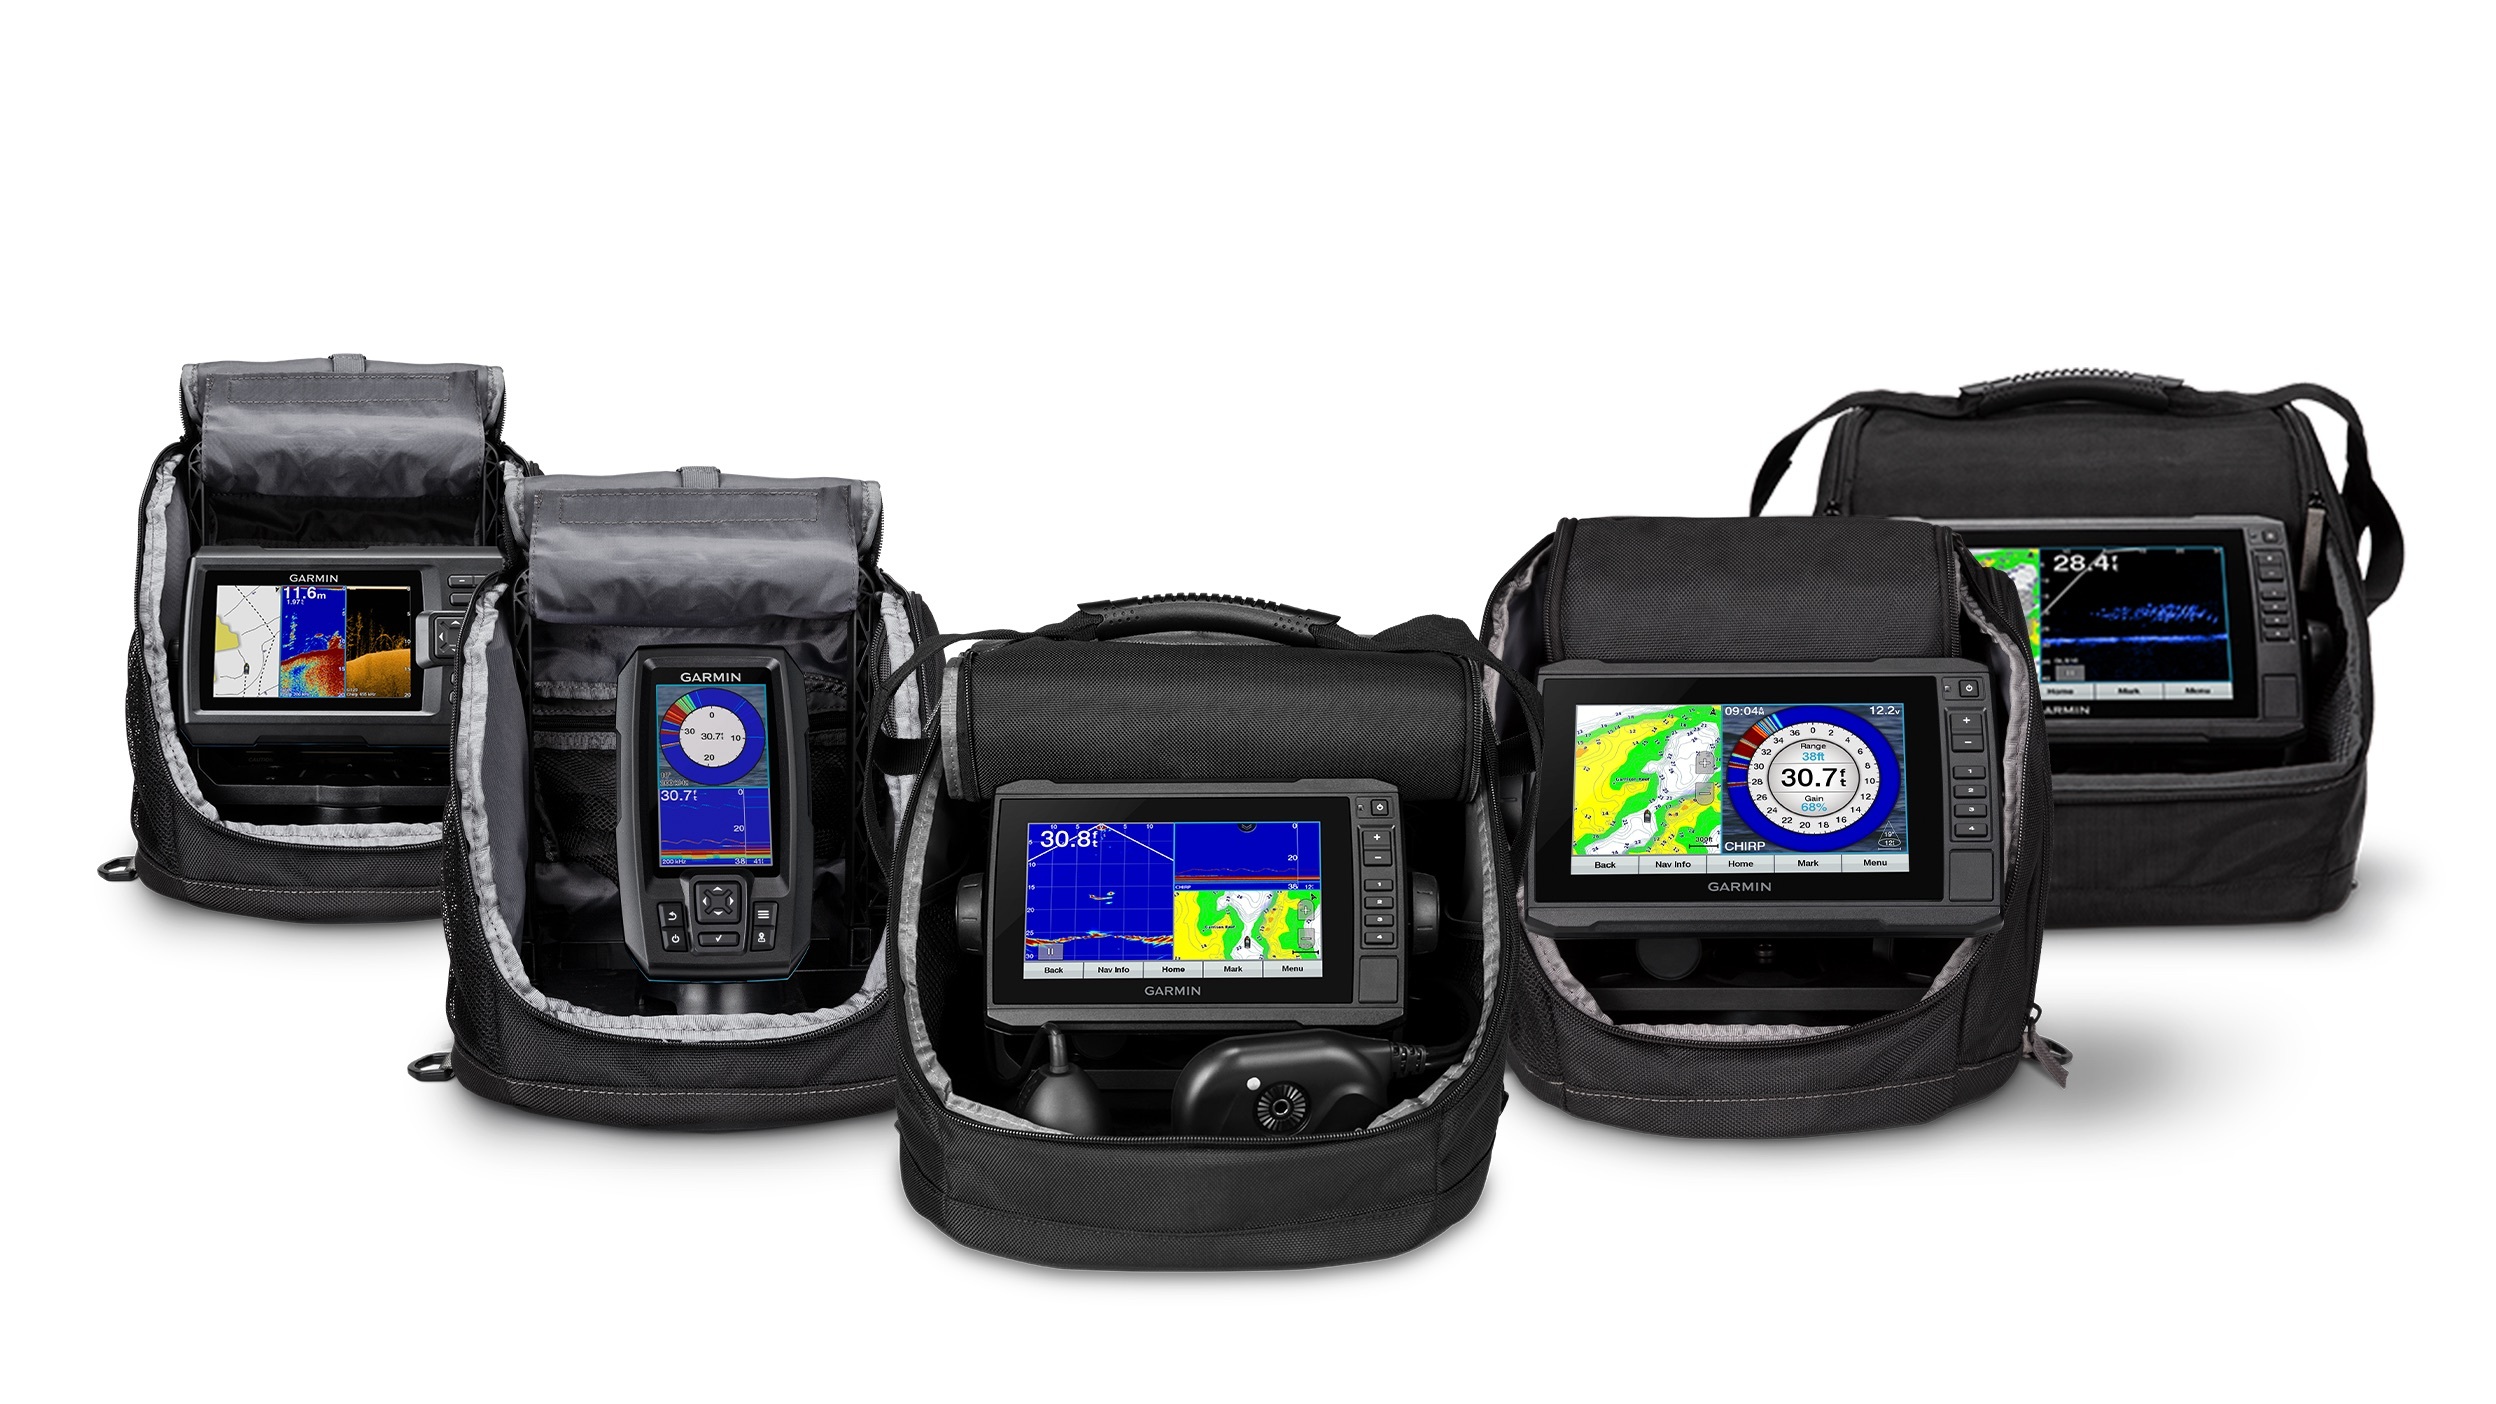 Drill fewer holes and catch more fish with Garmin's new ice